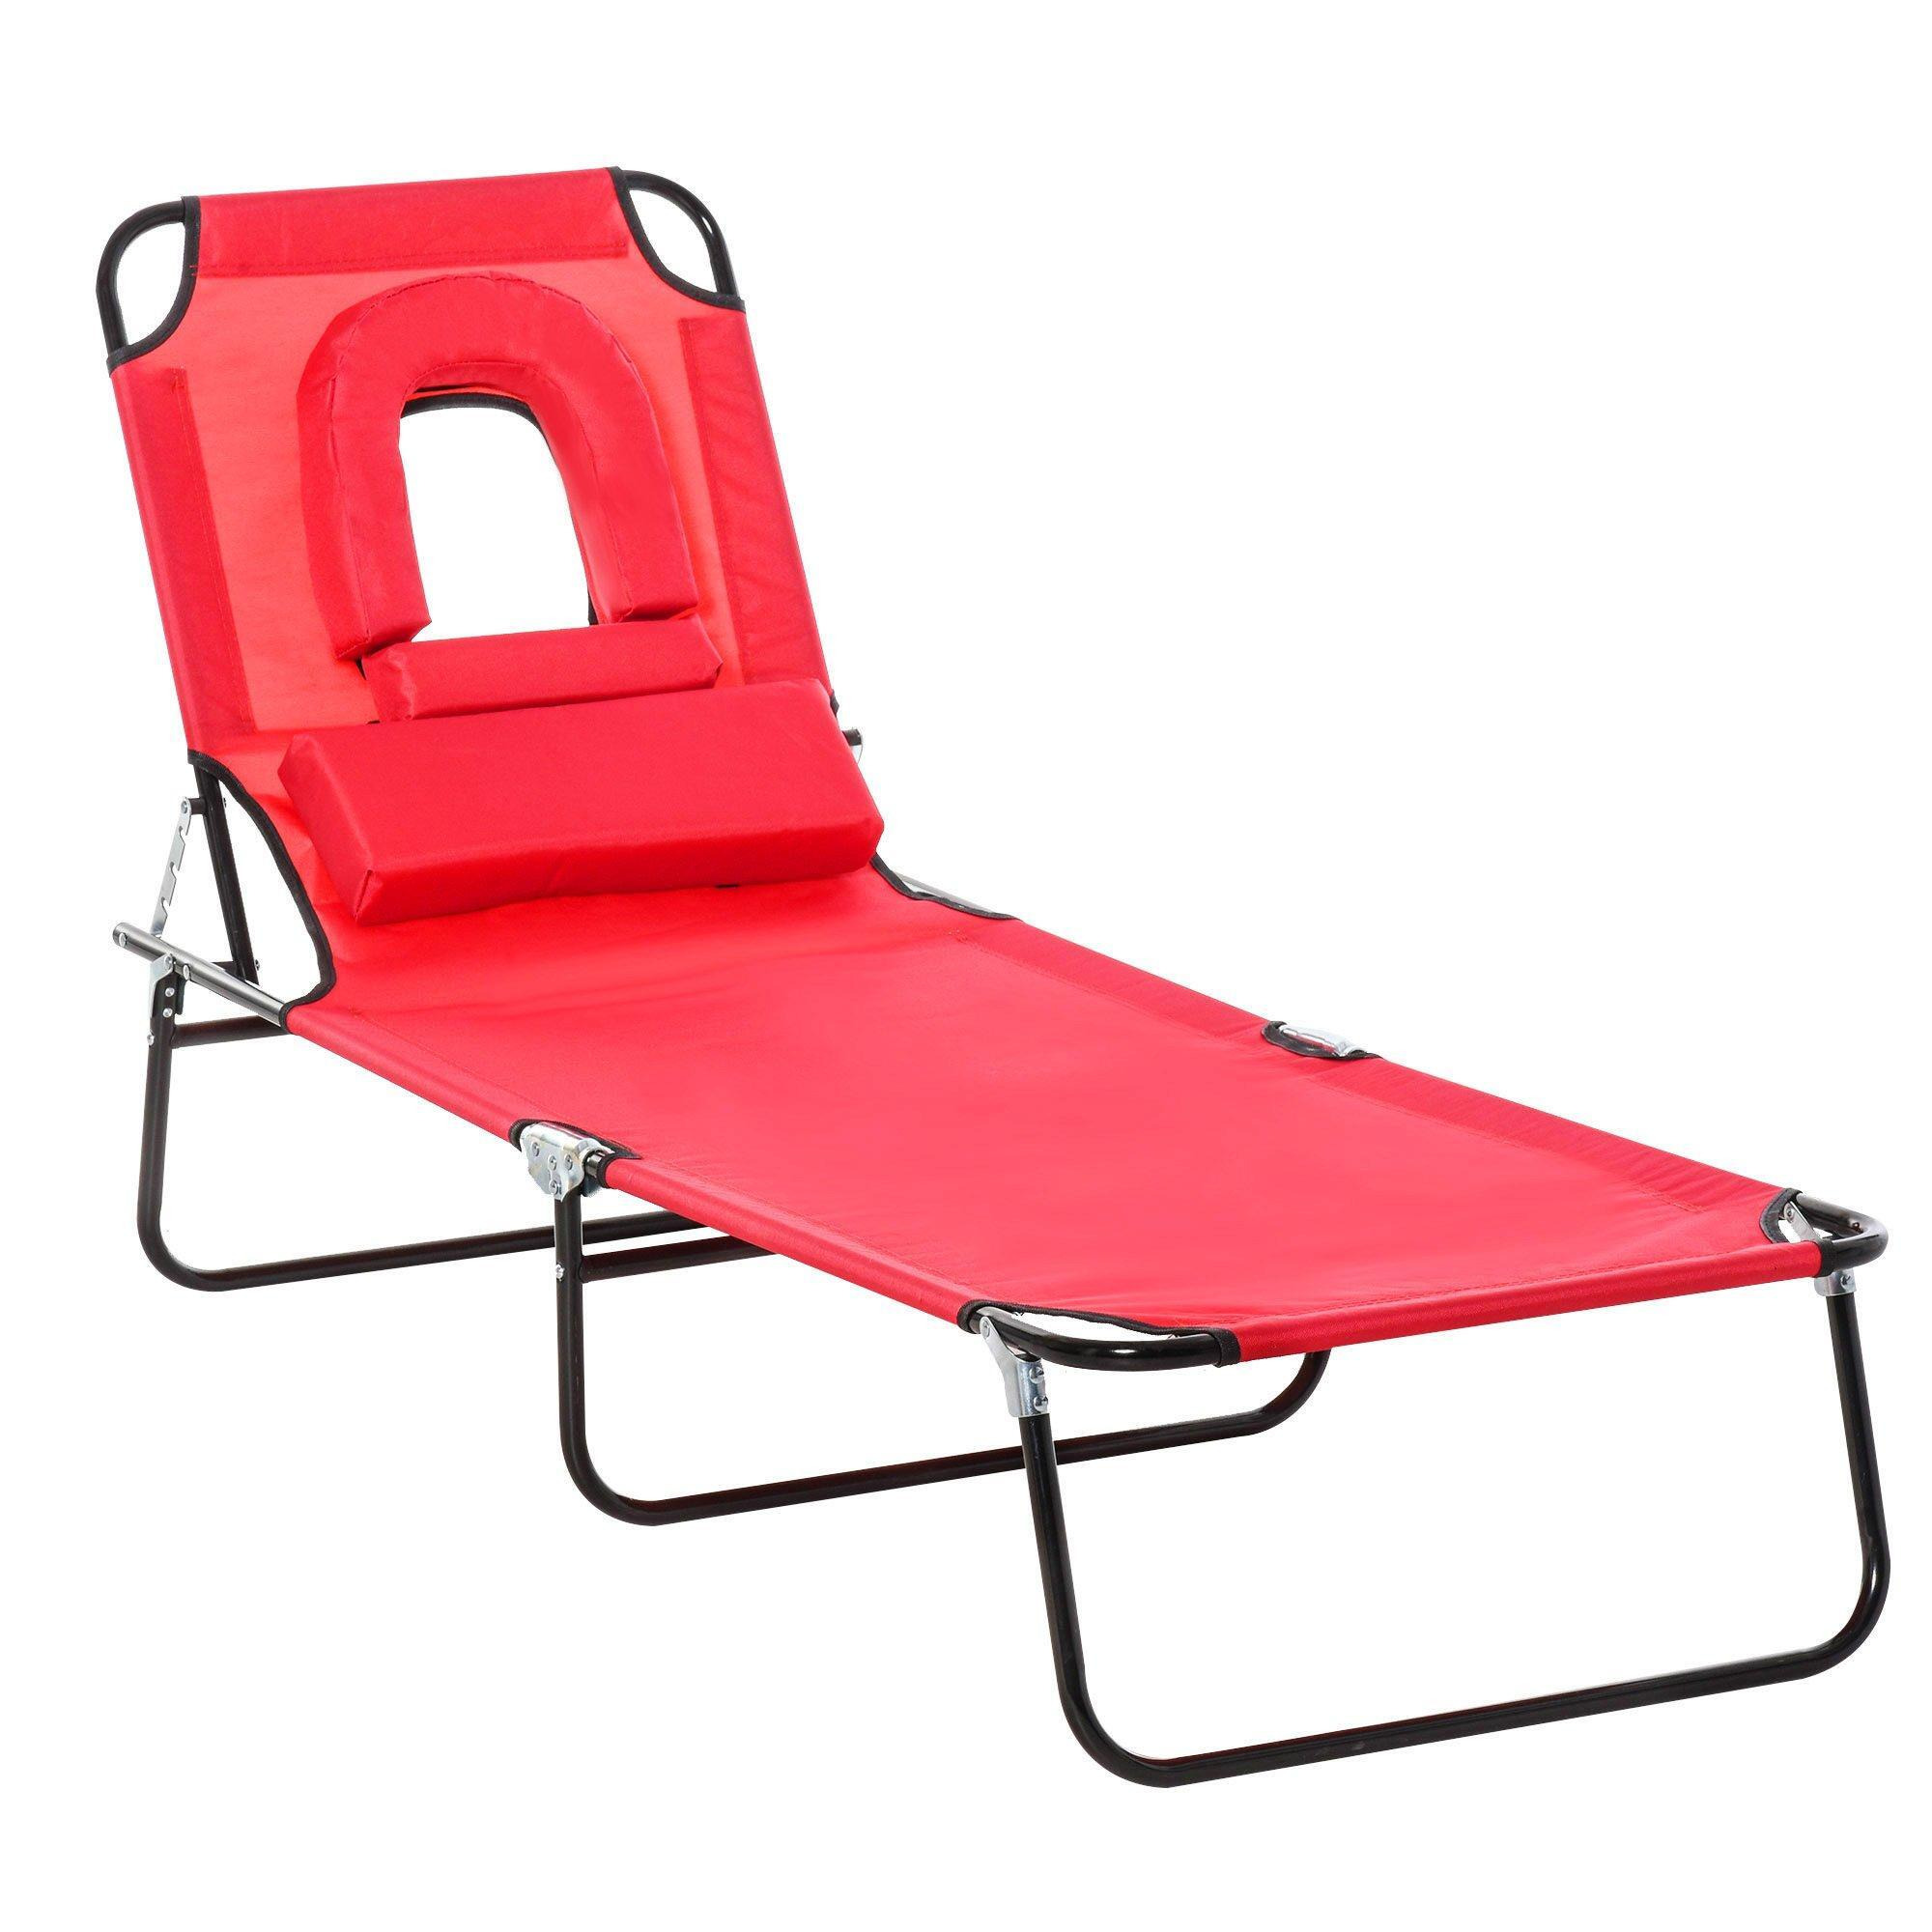 Folding Sun Lounger Reclining Chairwith Pillow Reading Hole - image 1